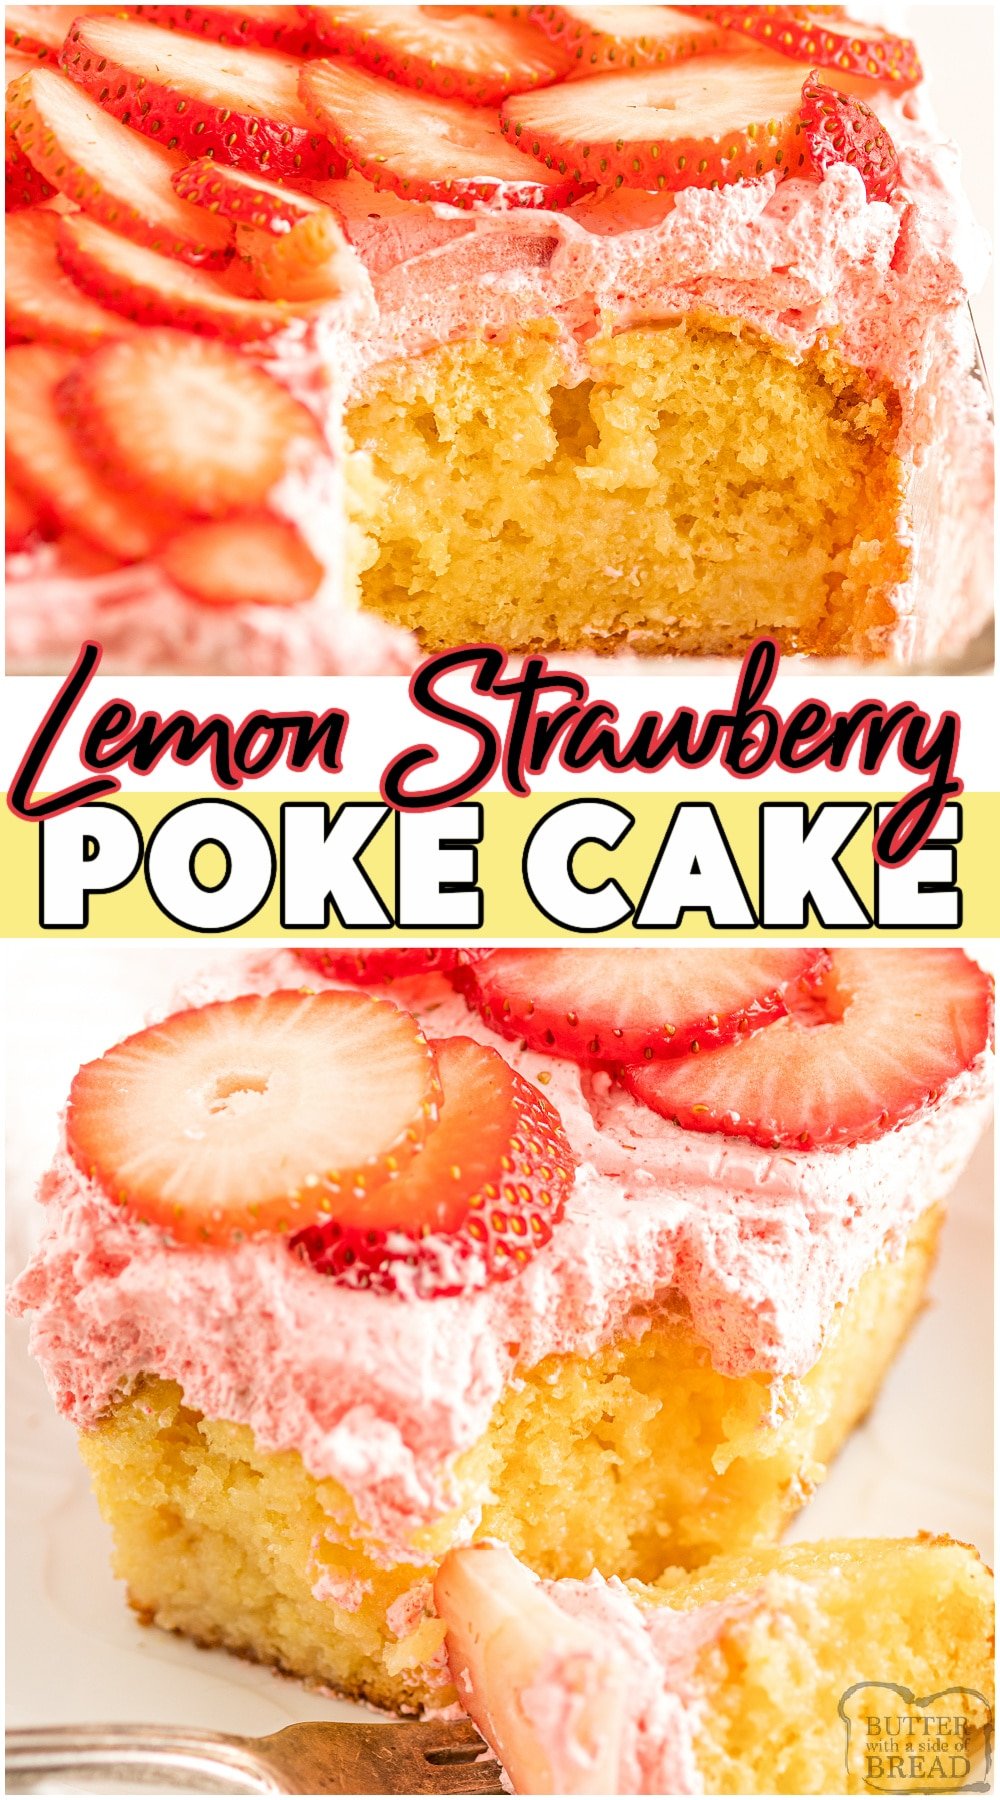 Strawberry Lemon poke cake made with lemon cake mix, fresh strawberries, Jell-o, and cool whip. Fun & fruity moist cake recipe perfect for a crowd! #cake #pokecake #lemon #strawberry #baking #summer #spring #easyrecipe from BUTTER WITH A SIDE OF BREAD